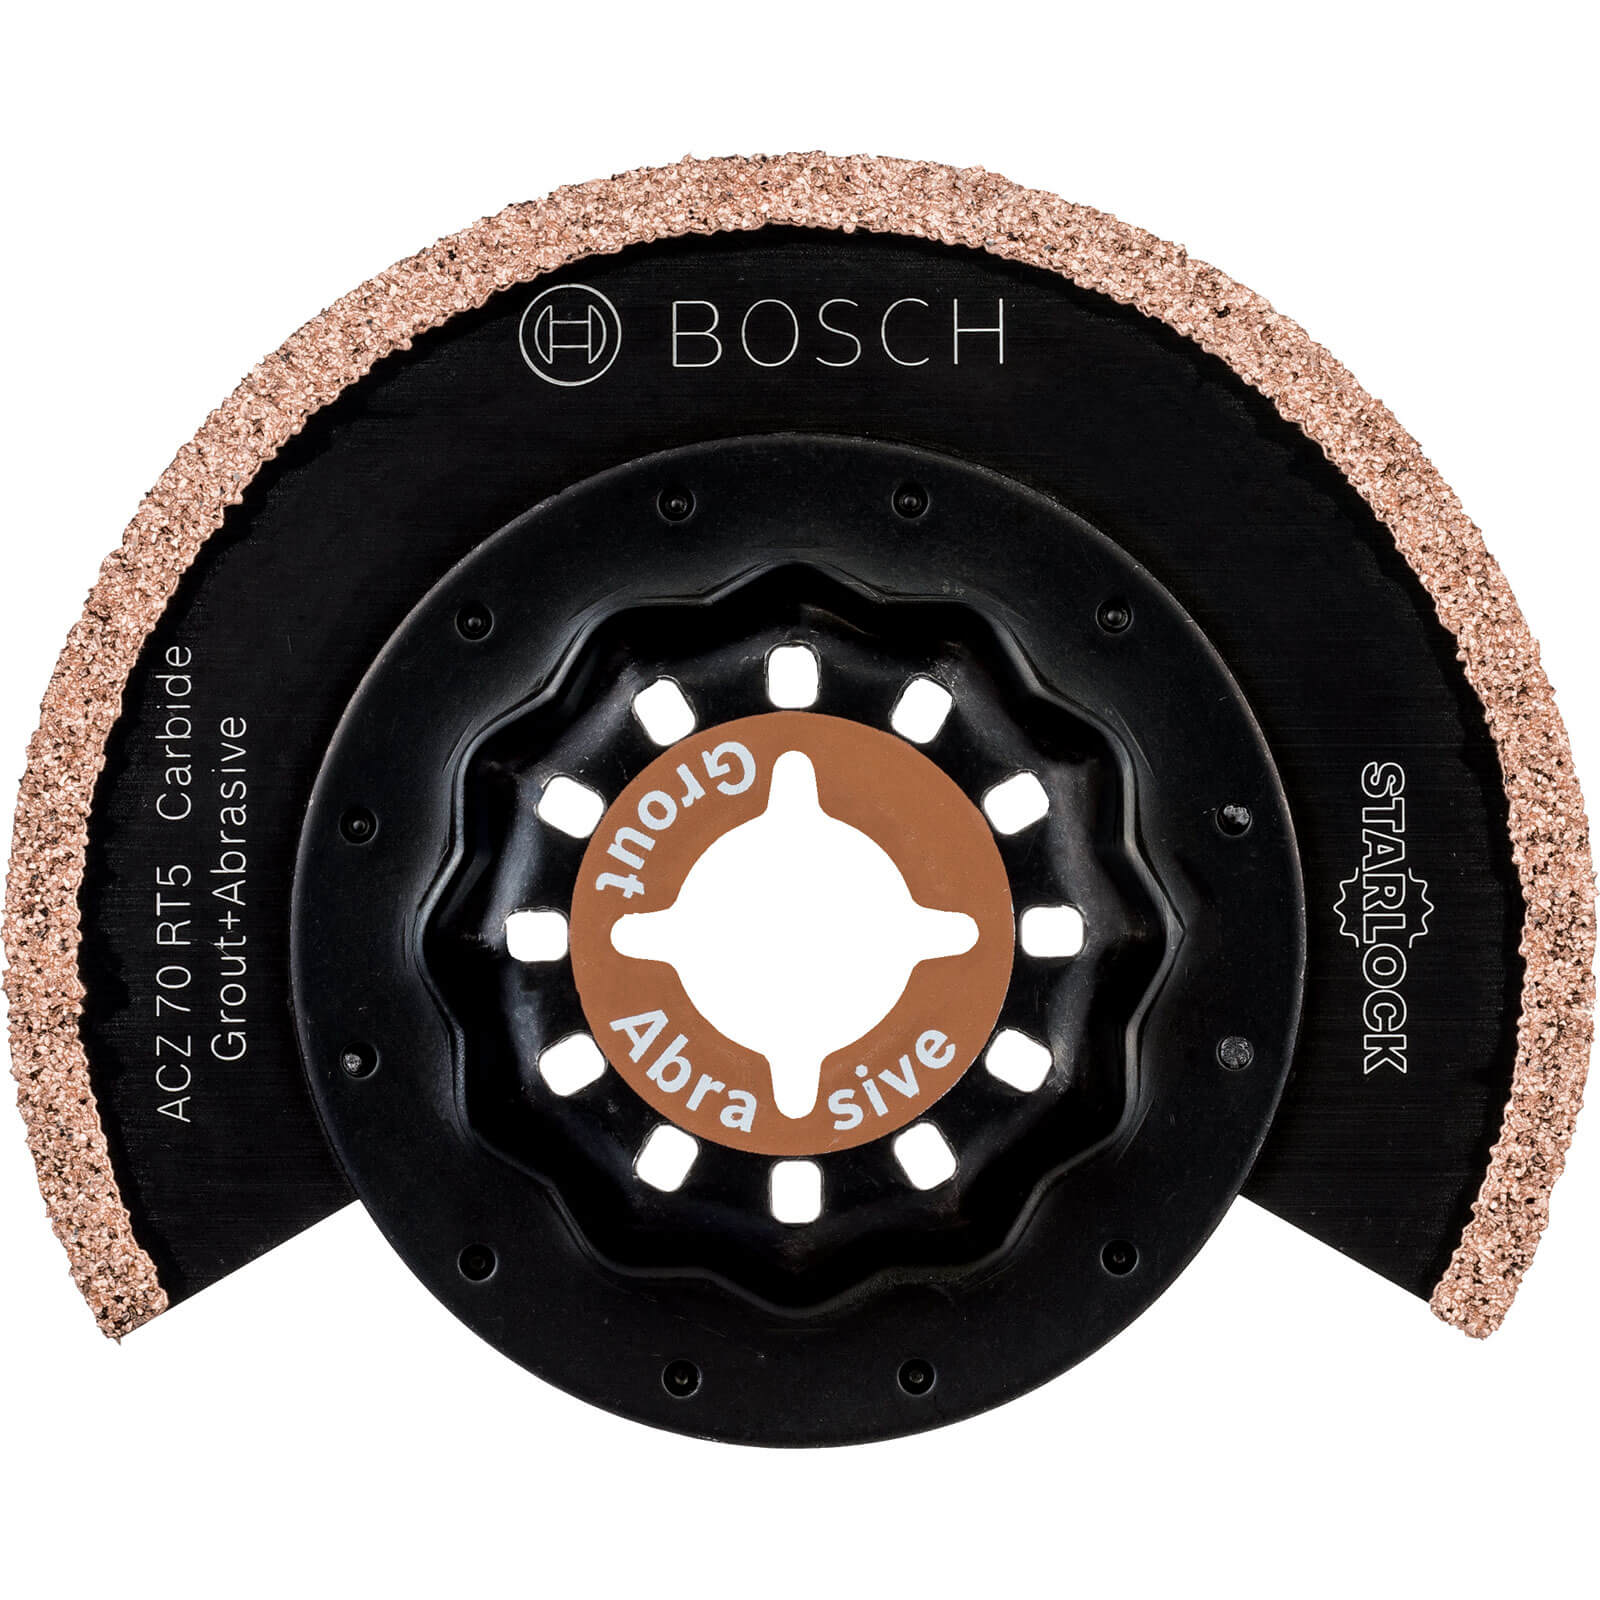 Photo of Bosch Acz 70 Rt5 Thin Grout Oscillating Multi Tool Segment Saw Blade 70mm Pack Of 1